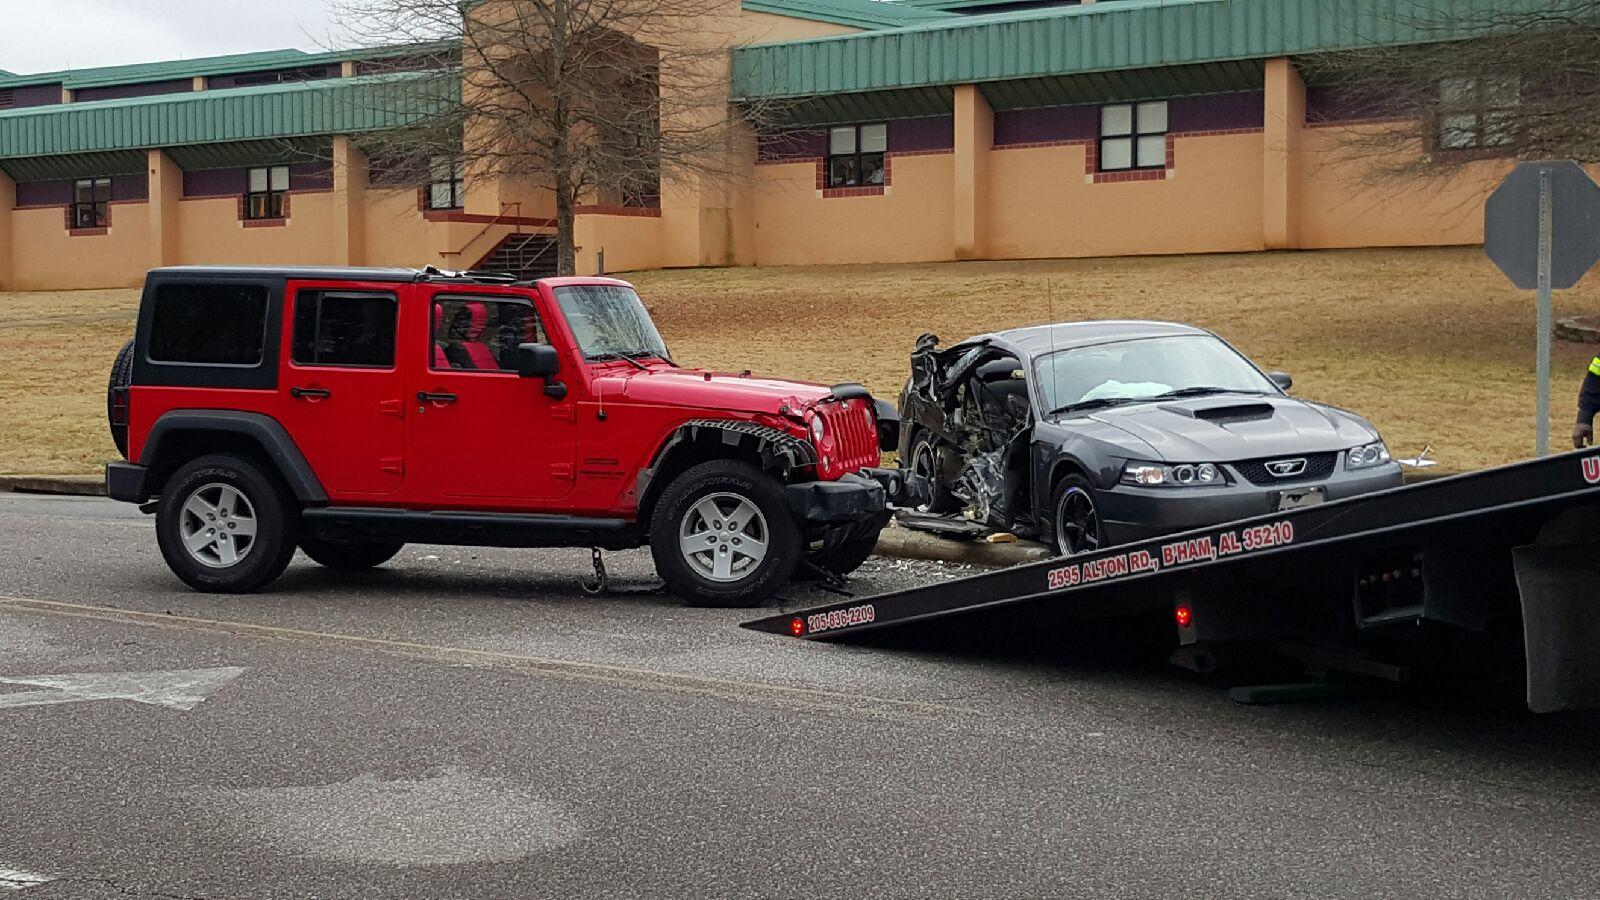 Two injured in wreck at Clay-Chalkville HS Friday morning